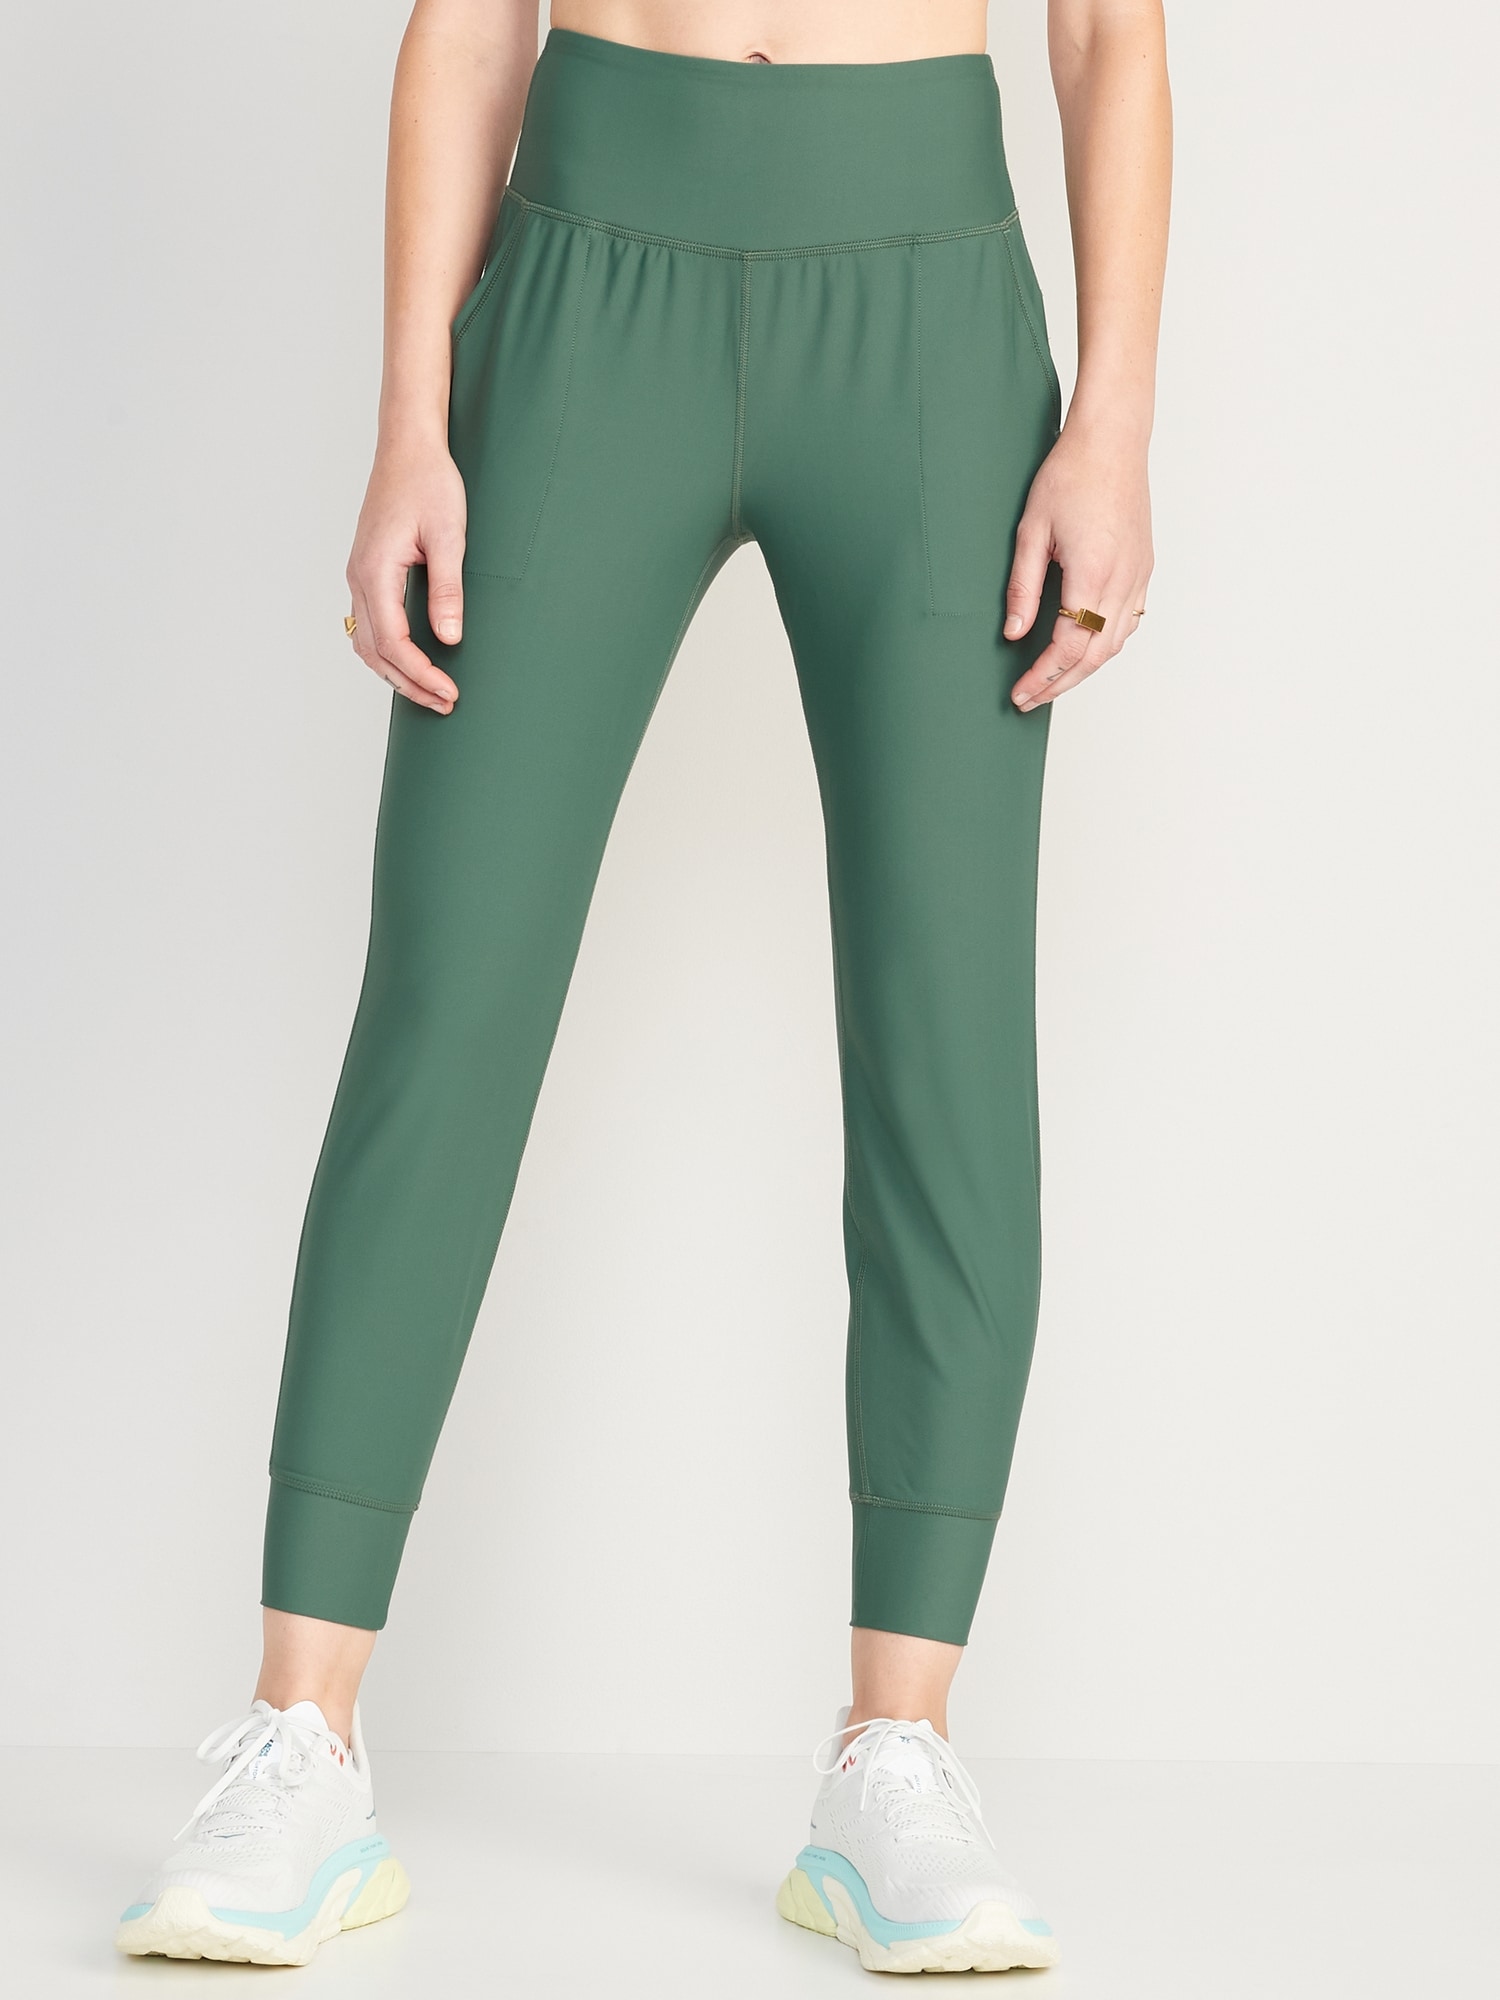 High-Waisted PowerSoft 7/8 Joggers for Women, Old Navy